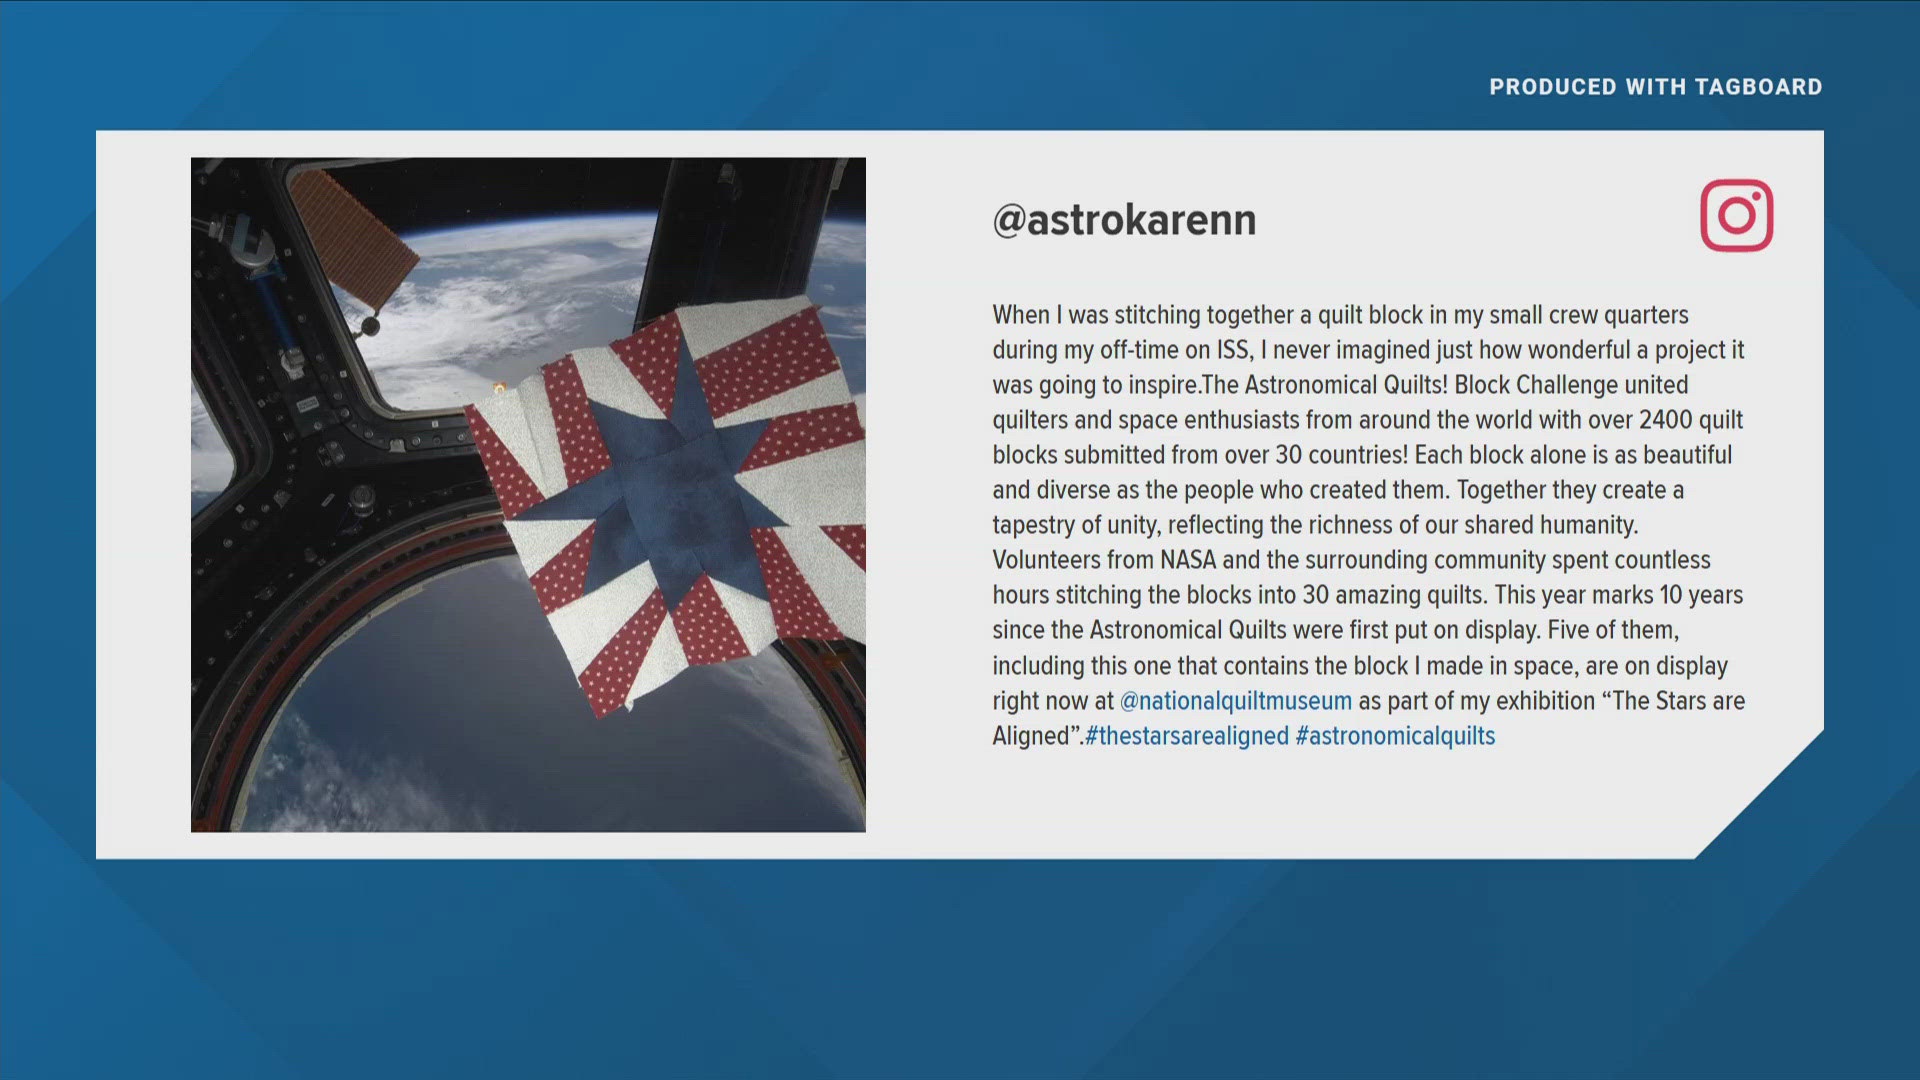 American astronaut Karen Nyberg shared her inspirations and what she made on the International Space Station.